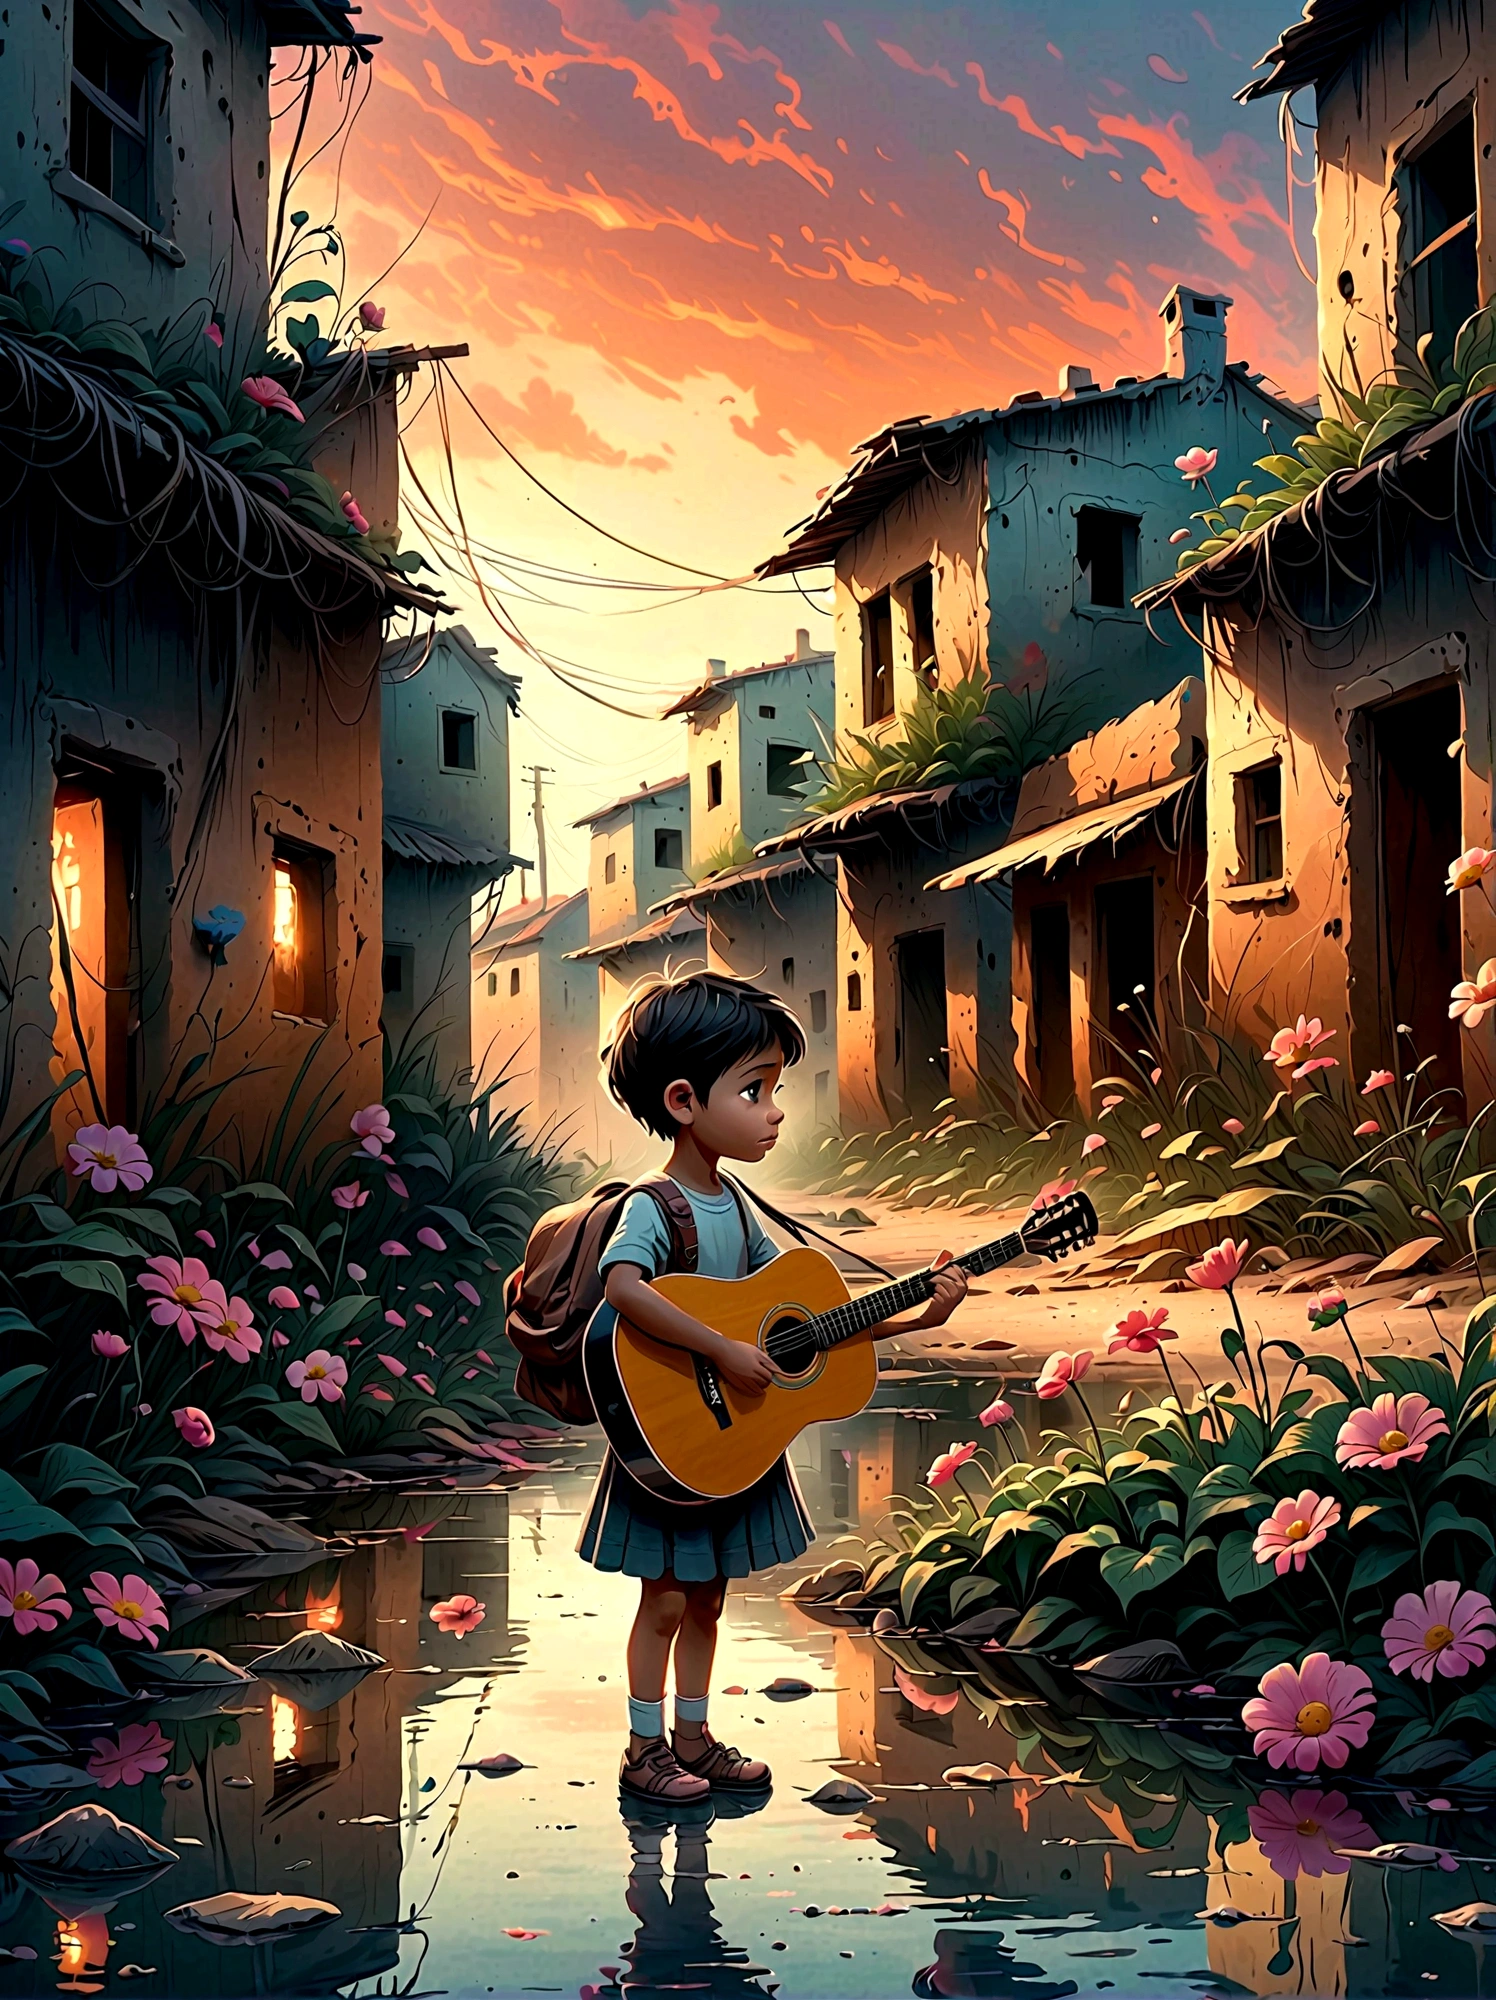 In the midst of a war-torn, smoky ruin, a child is playing a guitar, (A tenacious little flower grows at the child&#39;s feet), The scene captures the stark contrast between the devastation of the surroundings and the innocence of the . The ruins are filled with debris and remnants of buildings, with smoke and fire in the background. The child's expression is somber, reflecting the harsh reality of the situation. The overall mood is poignant and emotional, with muted colors and dramatic lighting to emphasize the desolation and the glimmer of hope represented by the music.